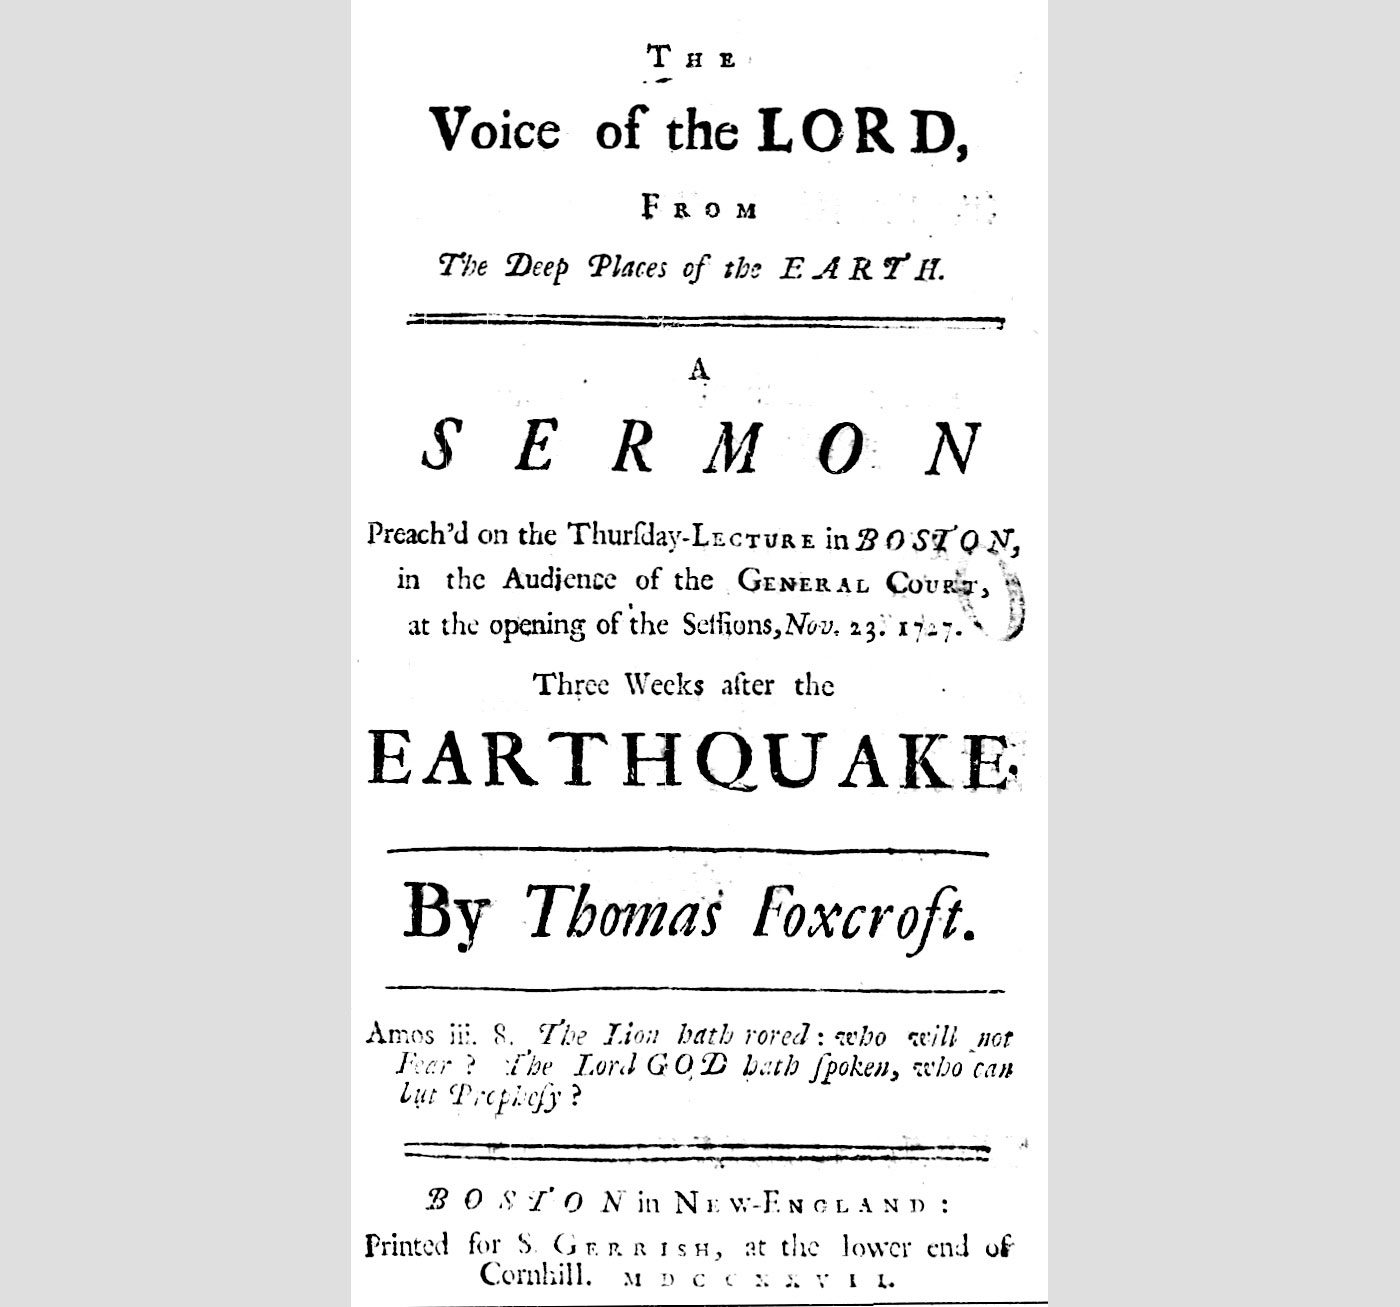 Cover page of a printed sermon by Thomas Foxcroft from 1727. The page reads: "The Voice of the LORD, From The Deep Plates of the EARTH. A SERMON Preach'd on the Thursday-Lecture in BOSTON in the Audience of the GENERAL COURT, at the opening of the Sessions, Nov. 23, 1727. Three Weeks after the EARTHQUAKE. By Thomas Foxcroft. Amos iii, 8. The Lion hath rored: who will not Fear? The Lord GOD hath spoken, who can but Prophesy? BOSTON in New-England: Printed for S. GERRISH, at the lower end of Cornhill. MDCCXXVII.